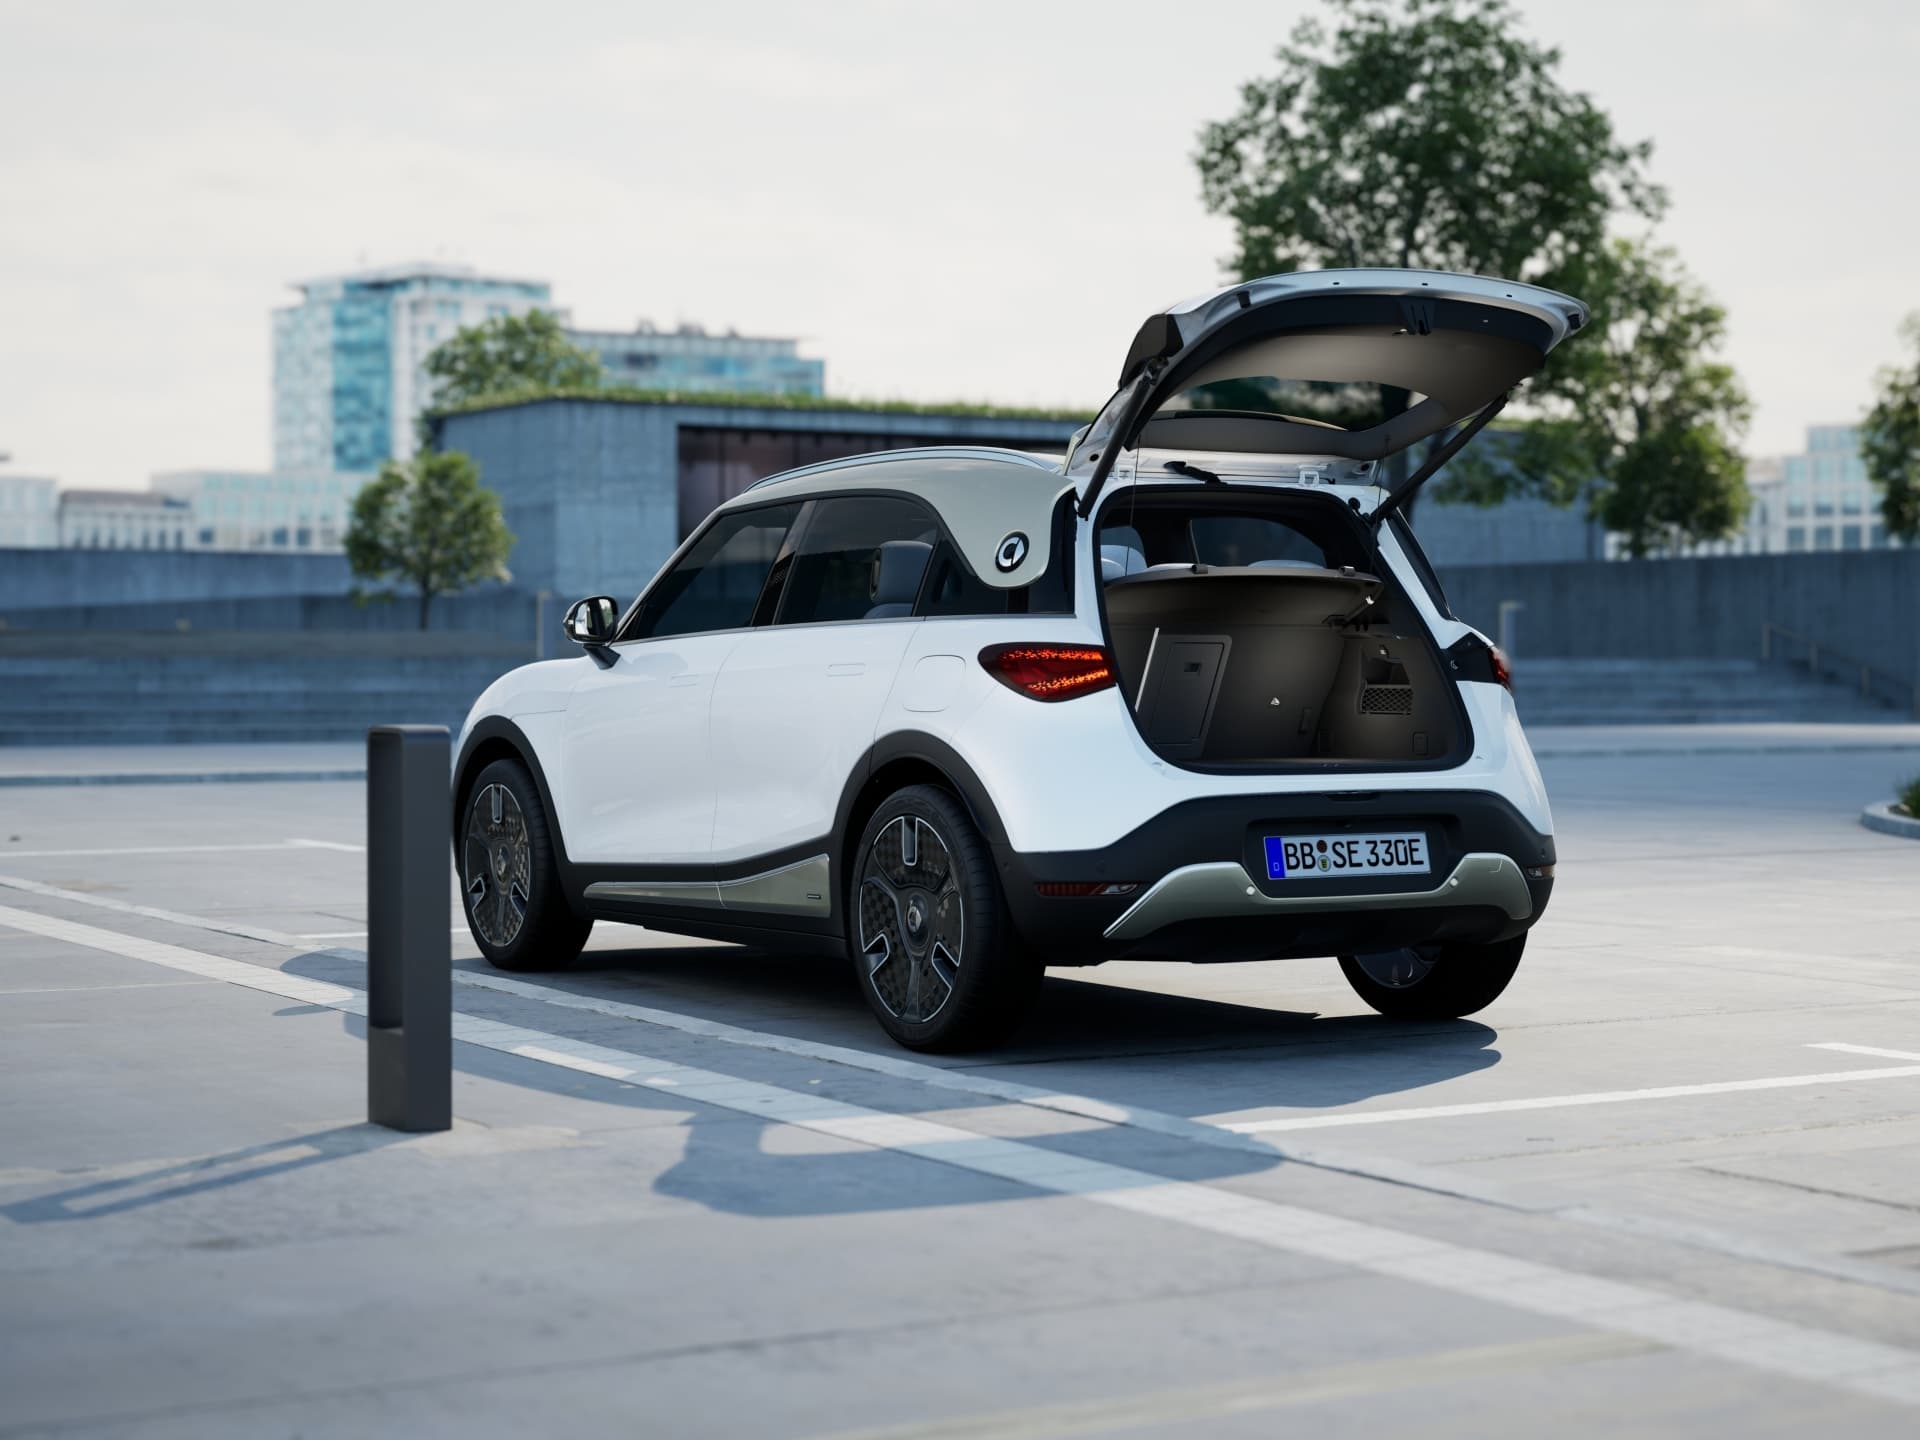 With 411 liters of trunk and 272 CV, there is no electric SUV that offers more for less money